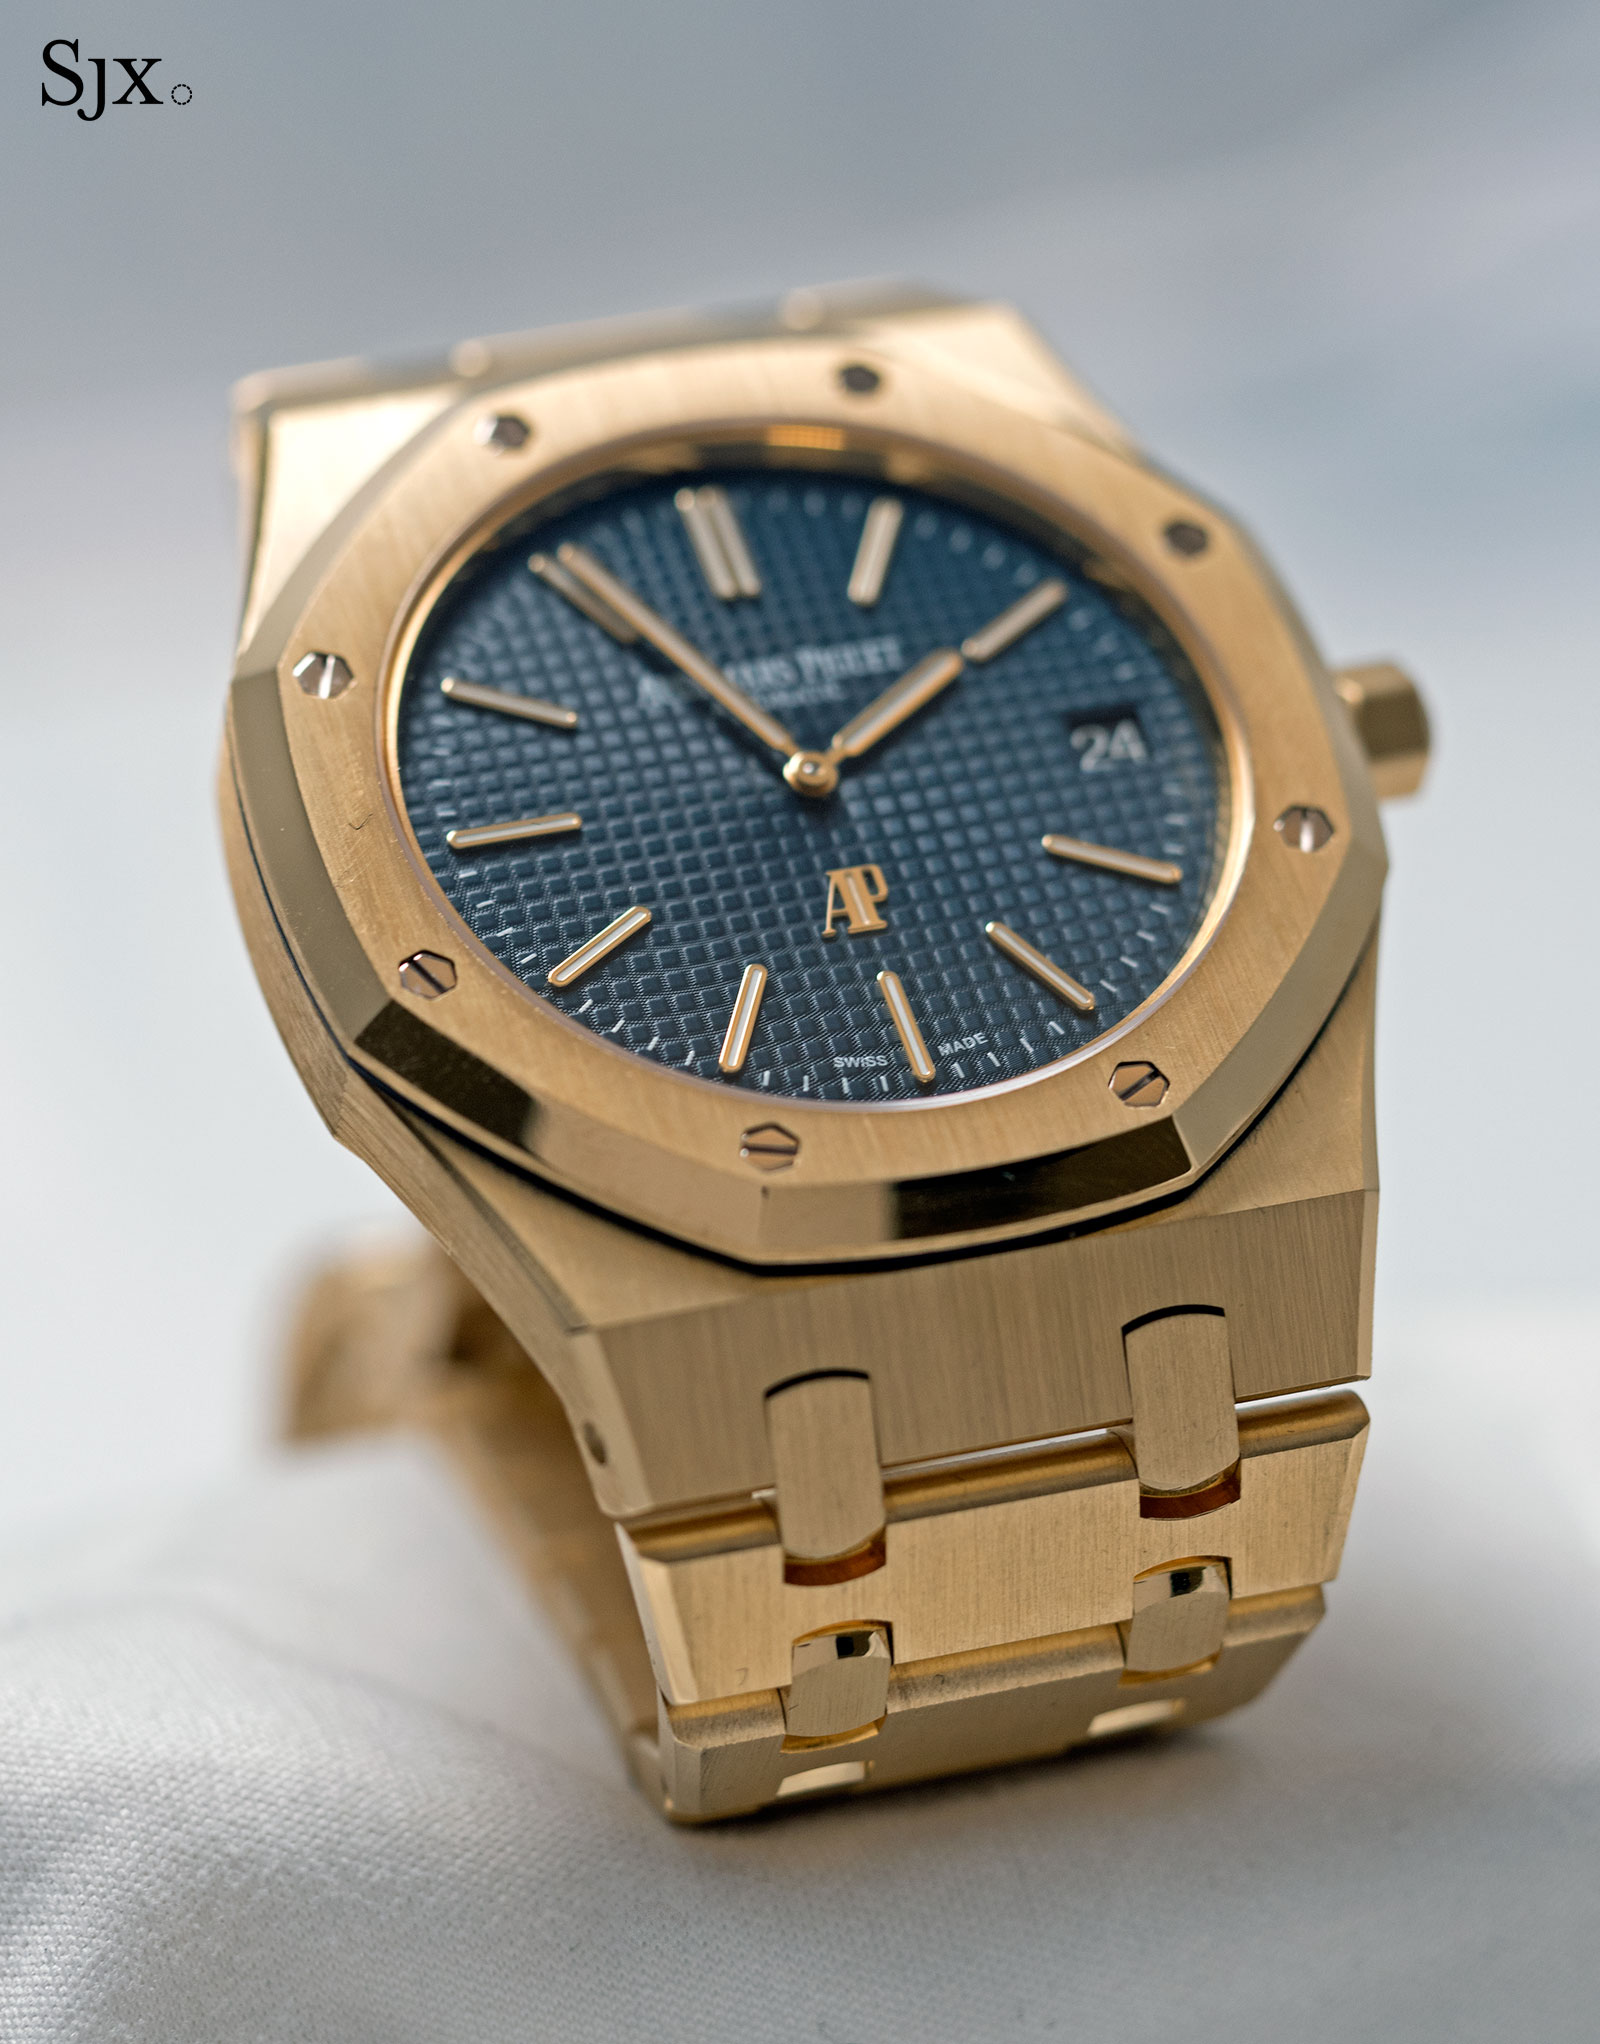 Hands-On with the Audemars Piguet Royal Oak Extra-Thin in Yellow Gold